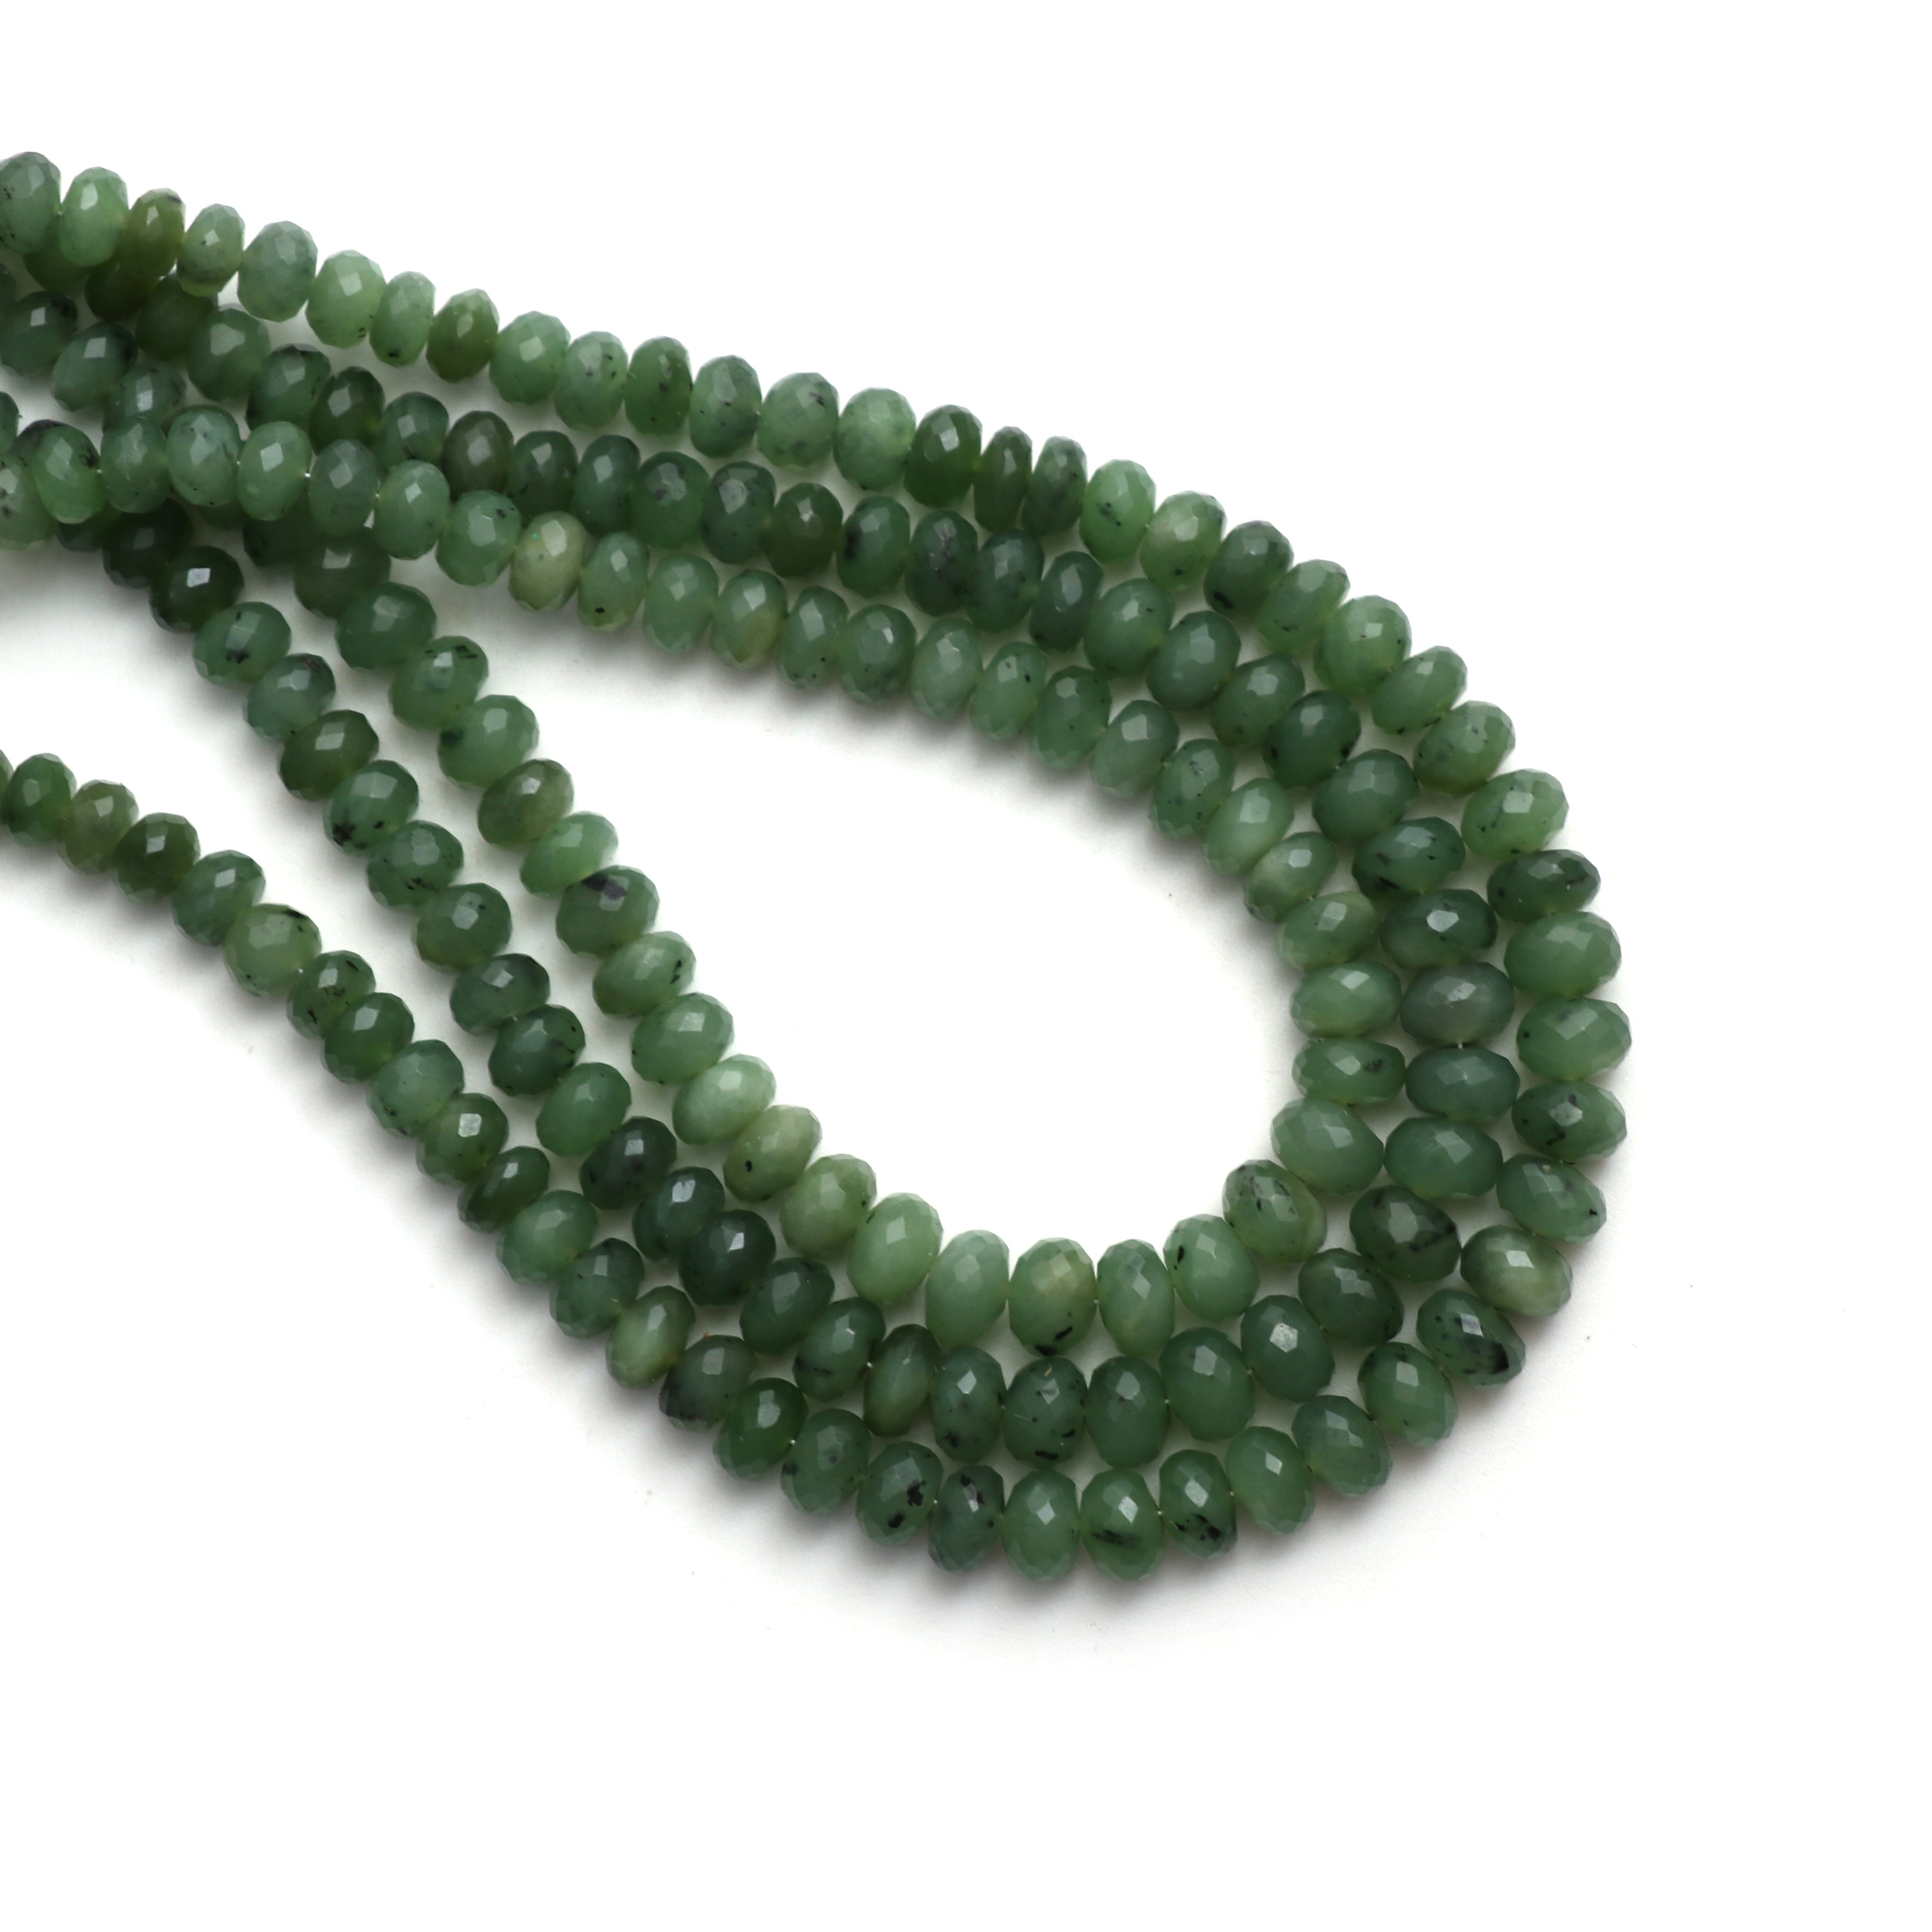 Nephrite Jade Faceted Rondelle Beads, 5.5 mm to 7 mm, Jade Jewelry Handmade  , 18 Inches Strand, Price Per Strand